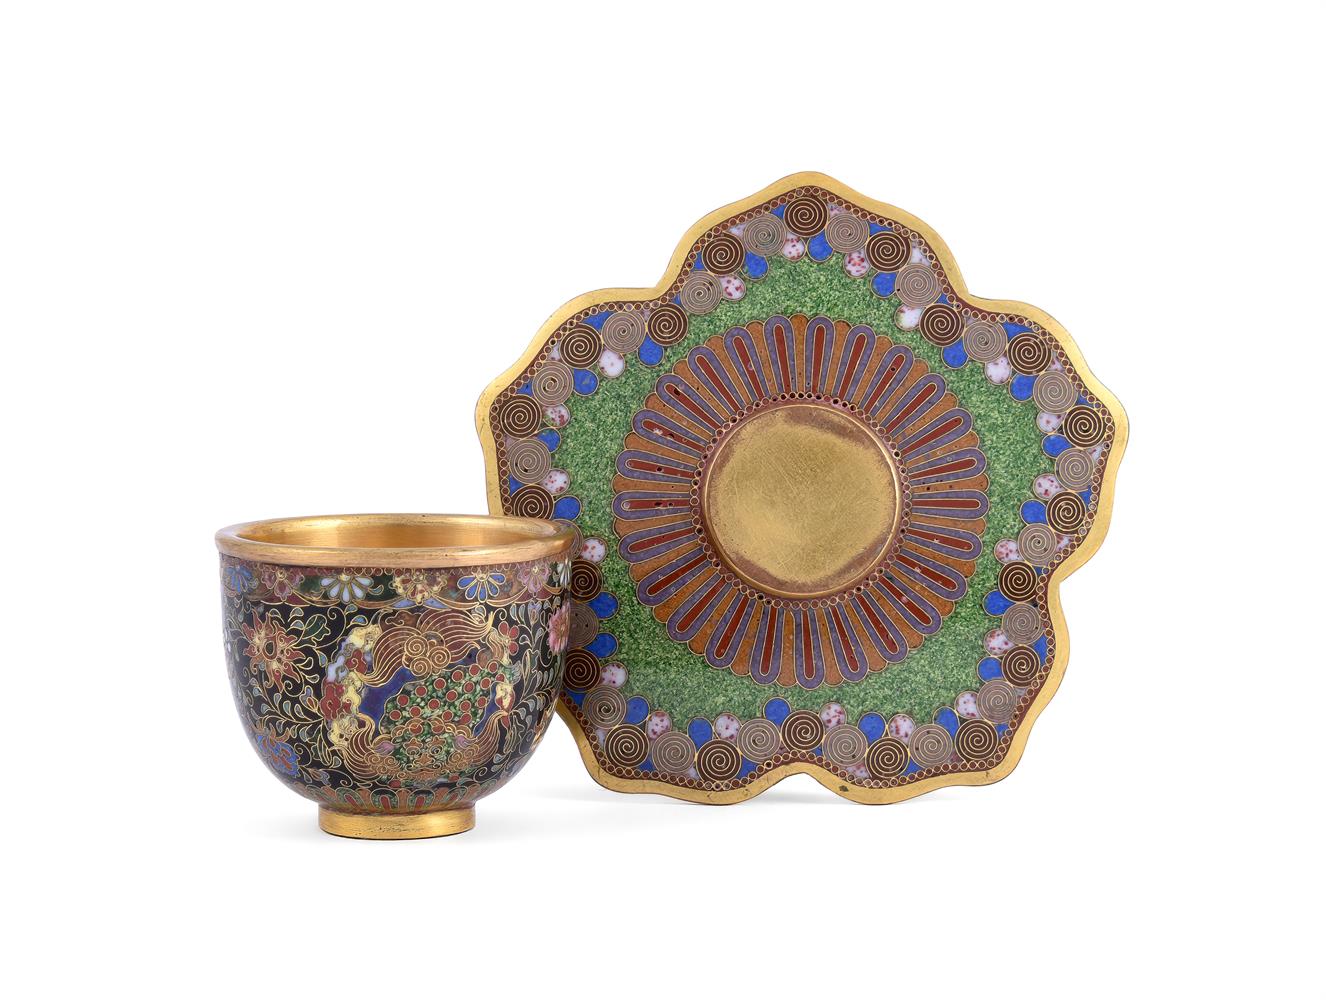 A SMALL JAPANESE CLOISONNÉ CUP AND STAND, EARLY 20TH CENTURY - Image 3 of 4